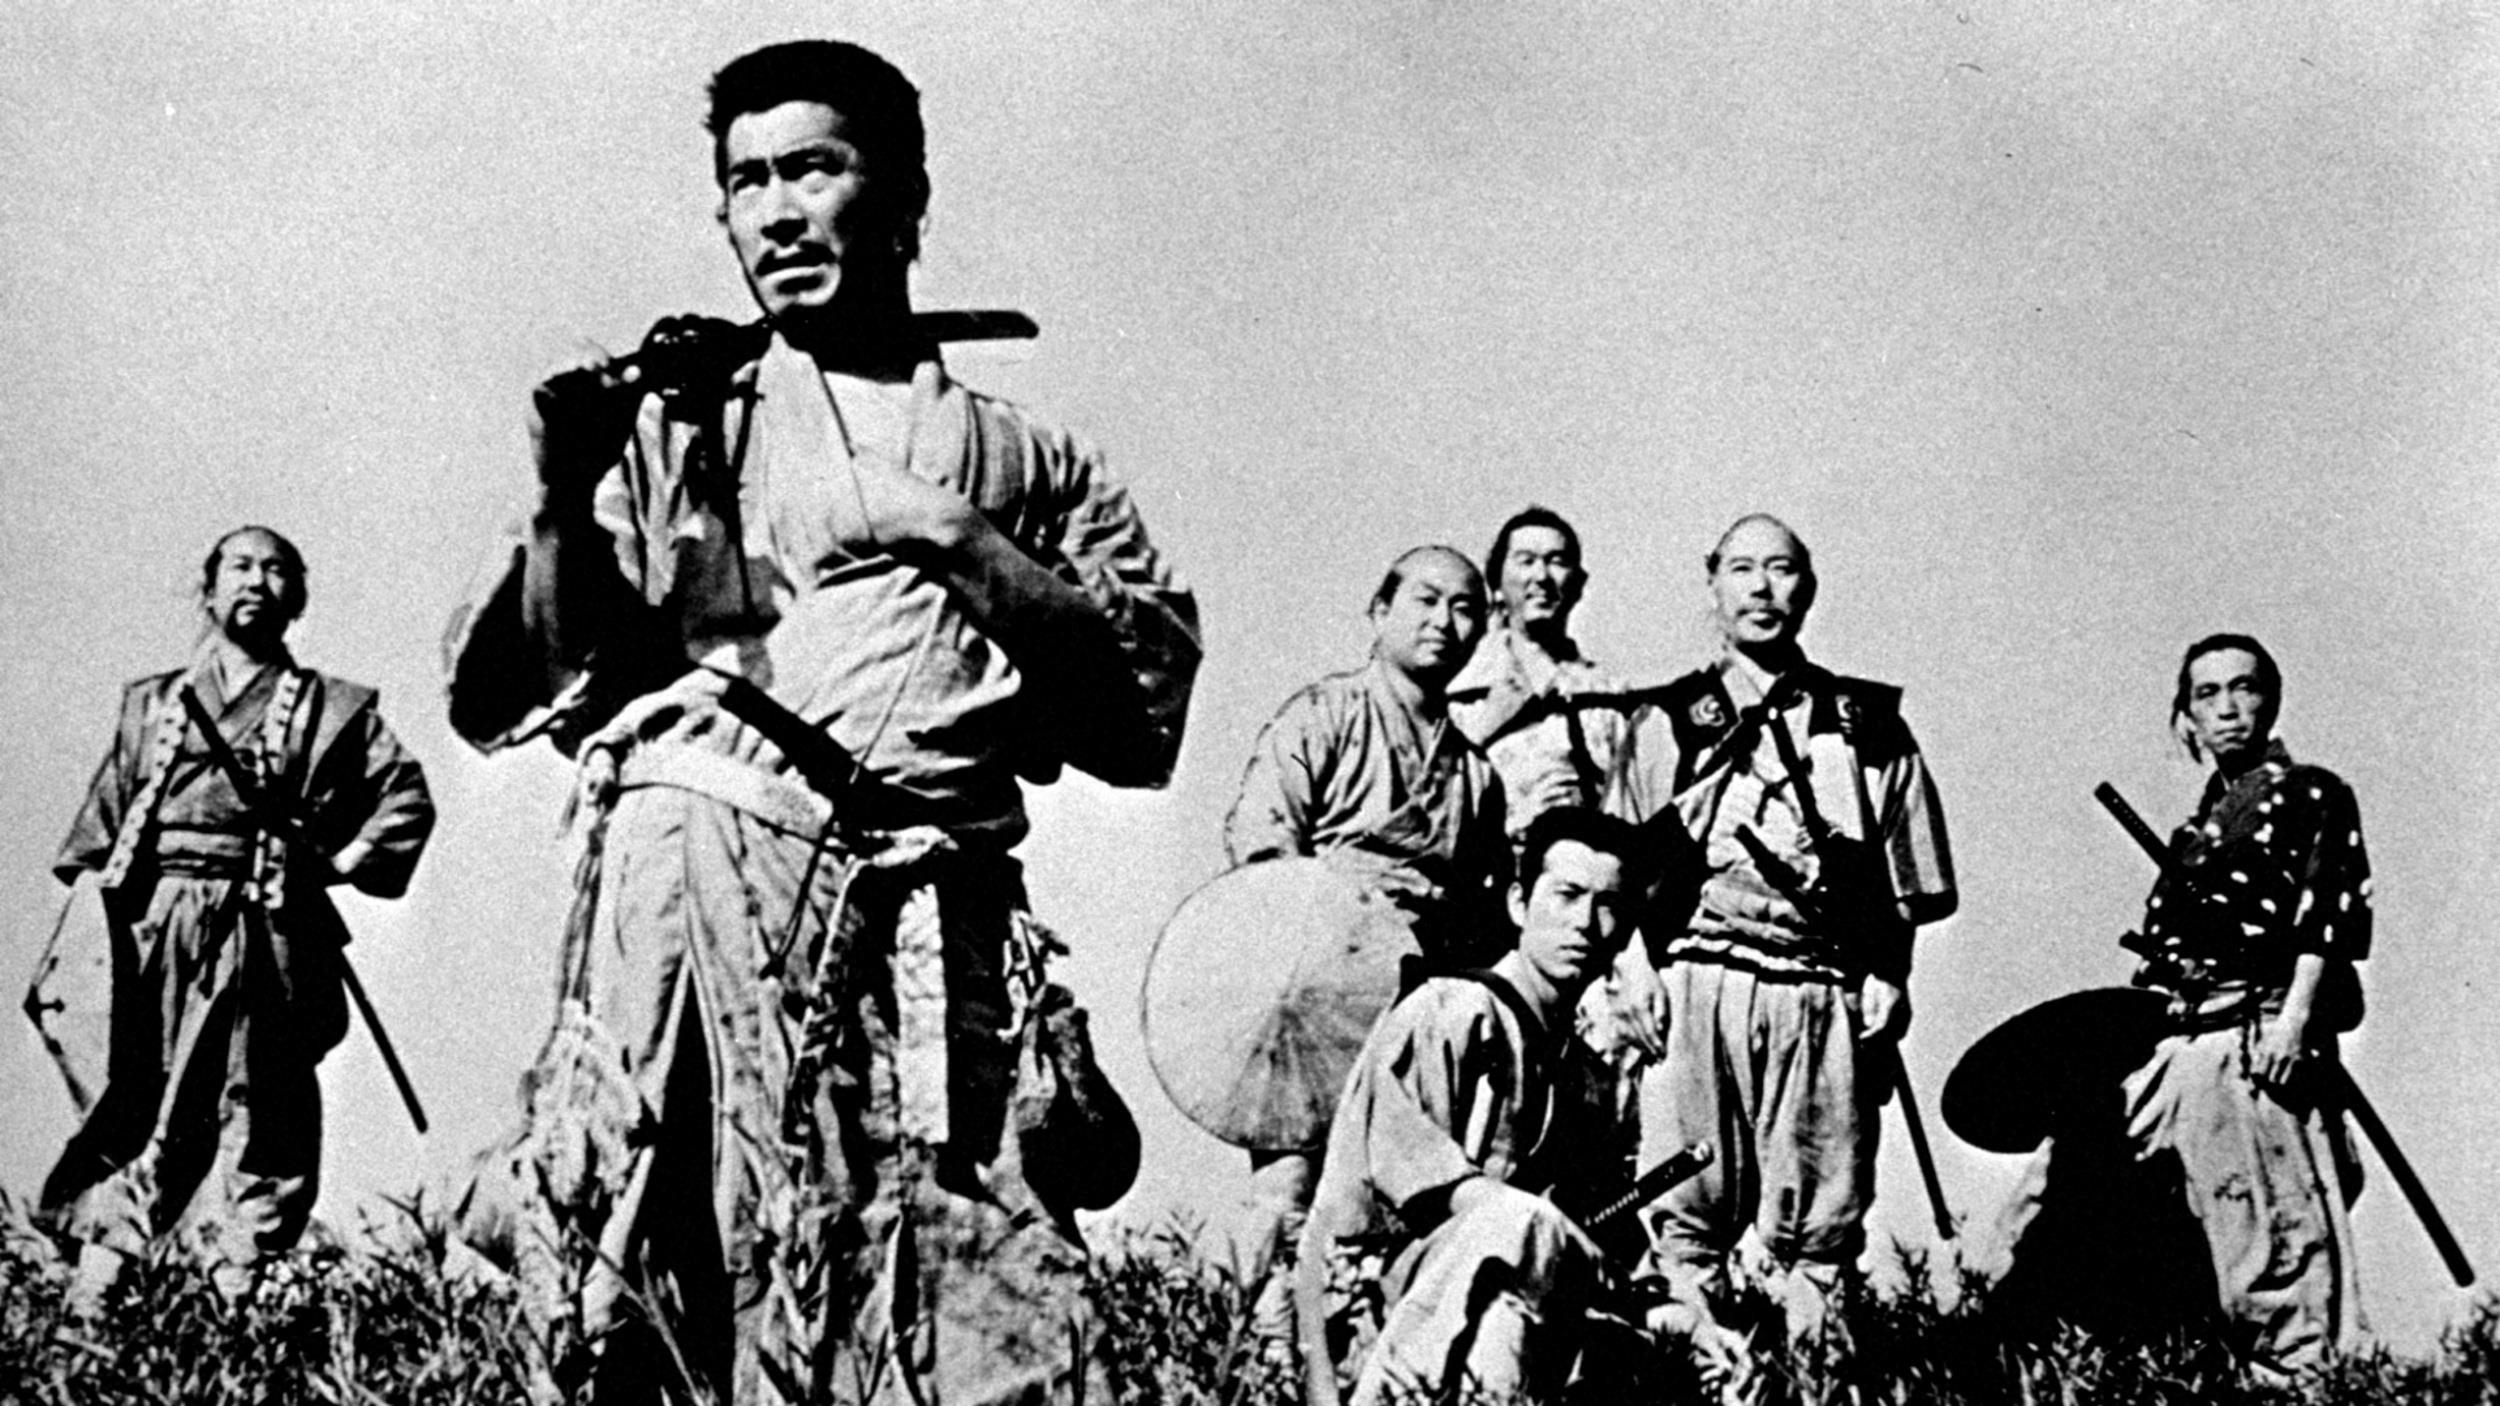 <p>Now that you’re shut in your home and the Academy has just given a foreign film with subtitles the Best Picture Oscar, you are officially out of excuses! It’s high time you finally settled in to watch Akira Kurosawa’s hugely entertaining/influential movie about a group of rōnin hired to protect a small village from a plundering horde of bandits. It just might be the fastest 207 minutes you’ve ever experienced, and you’ll finally know the power and the glory of Toshiro Mifune’s roguish Kikuchiyo. Enjoy. </p><p>You may also like: <a href='https://www.yardbarker.com/entertainment/articles/the_25_best_musicians_turned_actors_031924/s1__29781515'>The 25 best musicians-turned-actors</a></p>